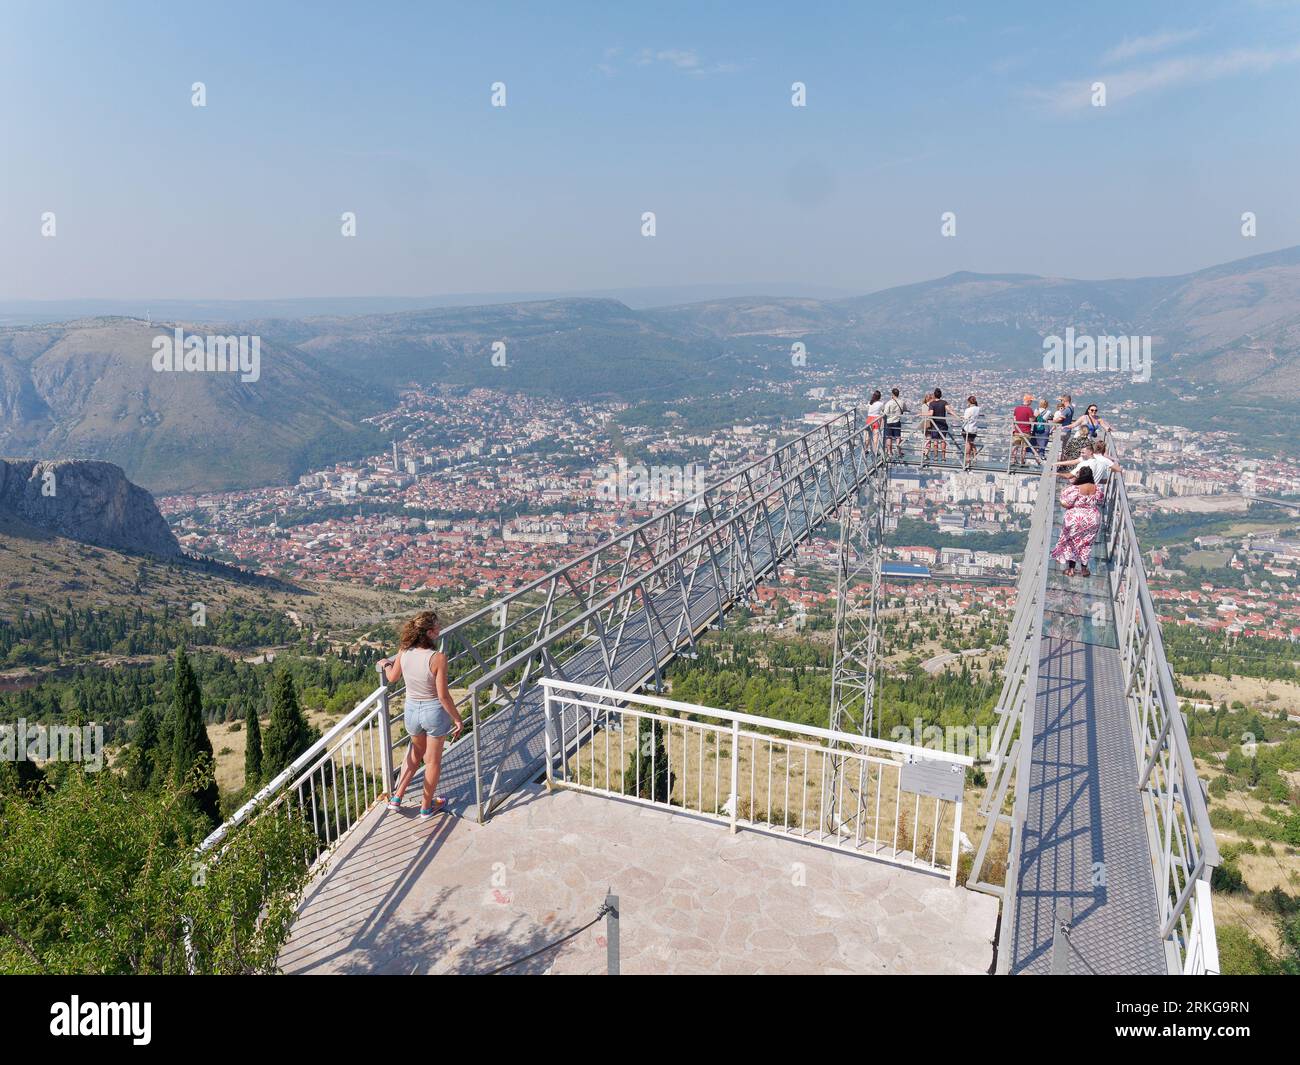 Viewpoint from Skywalk platform over the city of Mostar and surrounding countryside and hills in Bosnia and Herzegovina, August 24, 2023. Stock Photo